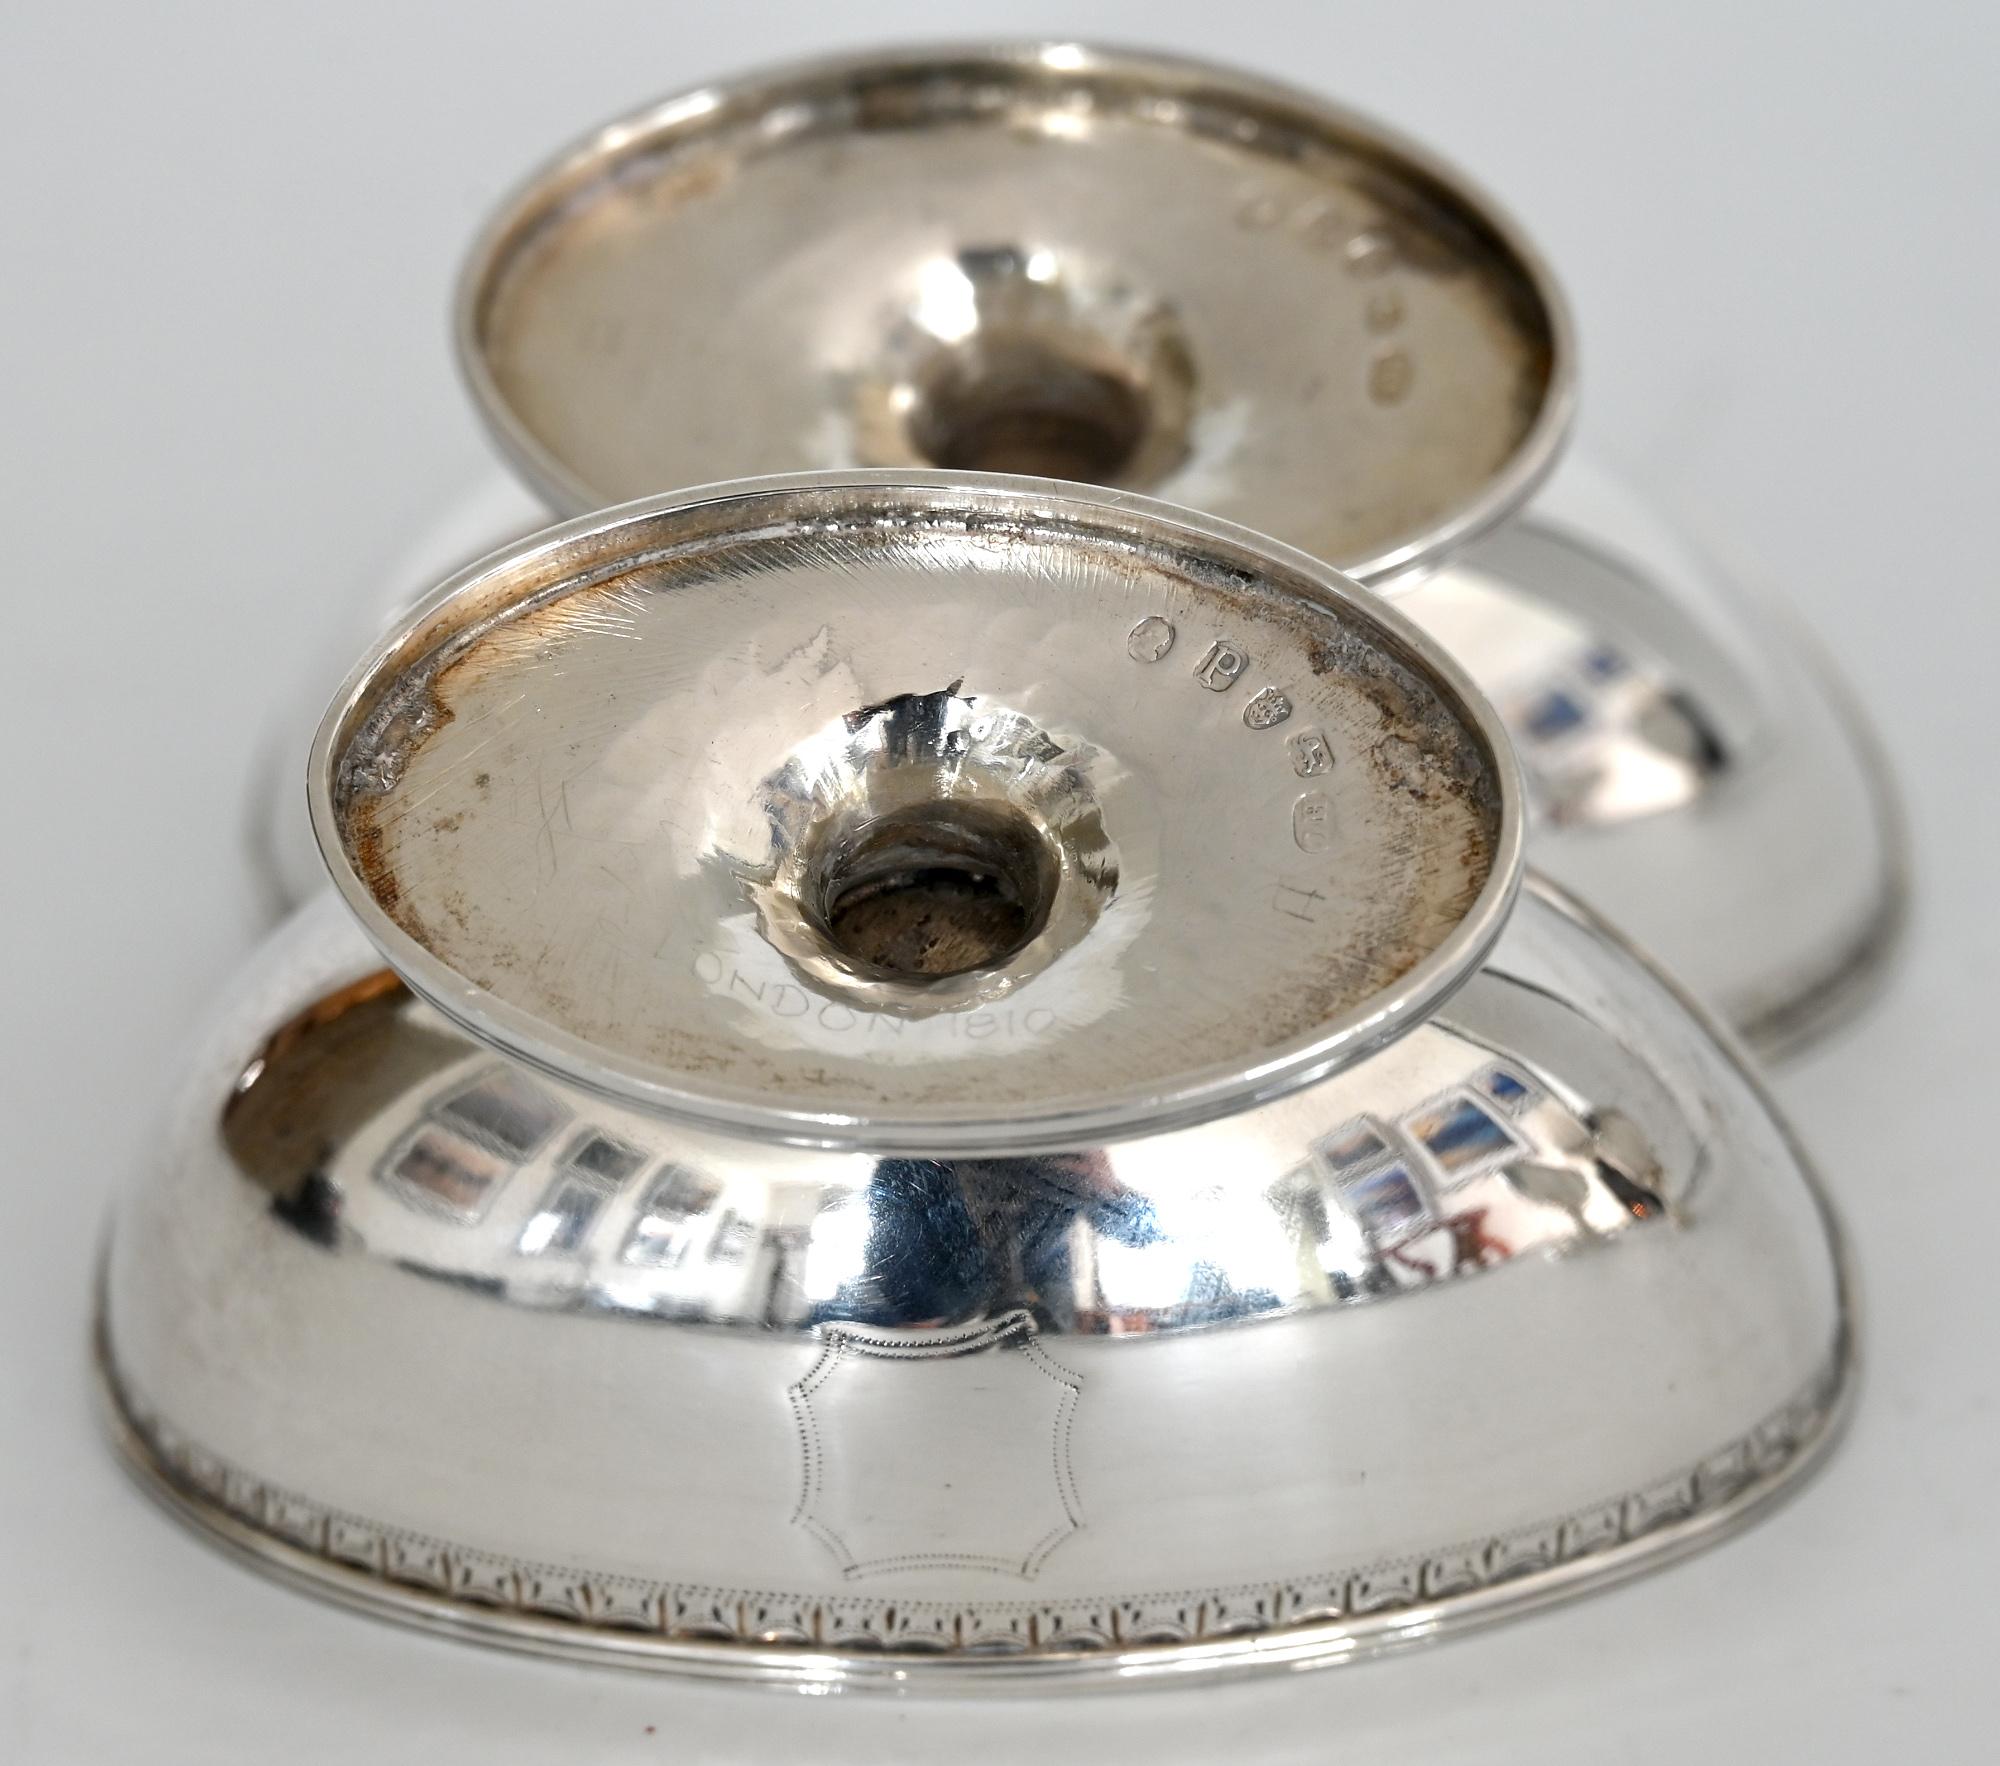 English Pair Of 18th Century Saliers London 1790 Mm Henry Chawner Sterling Silver For Sale